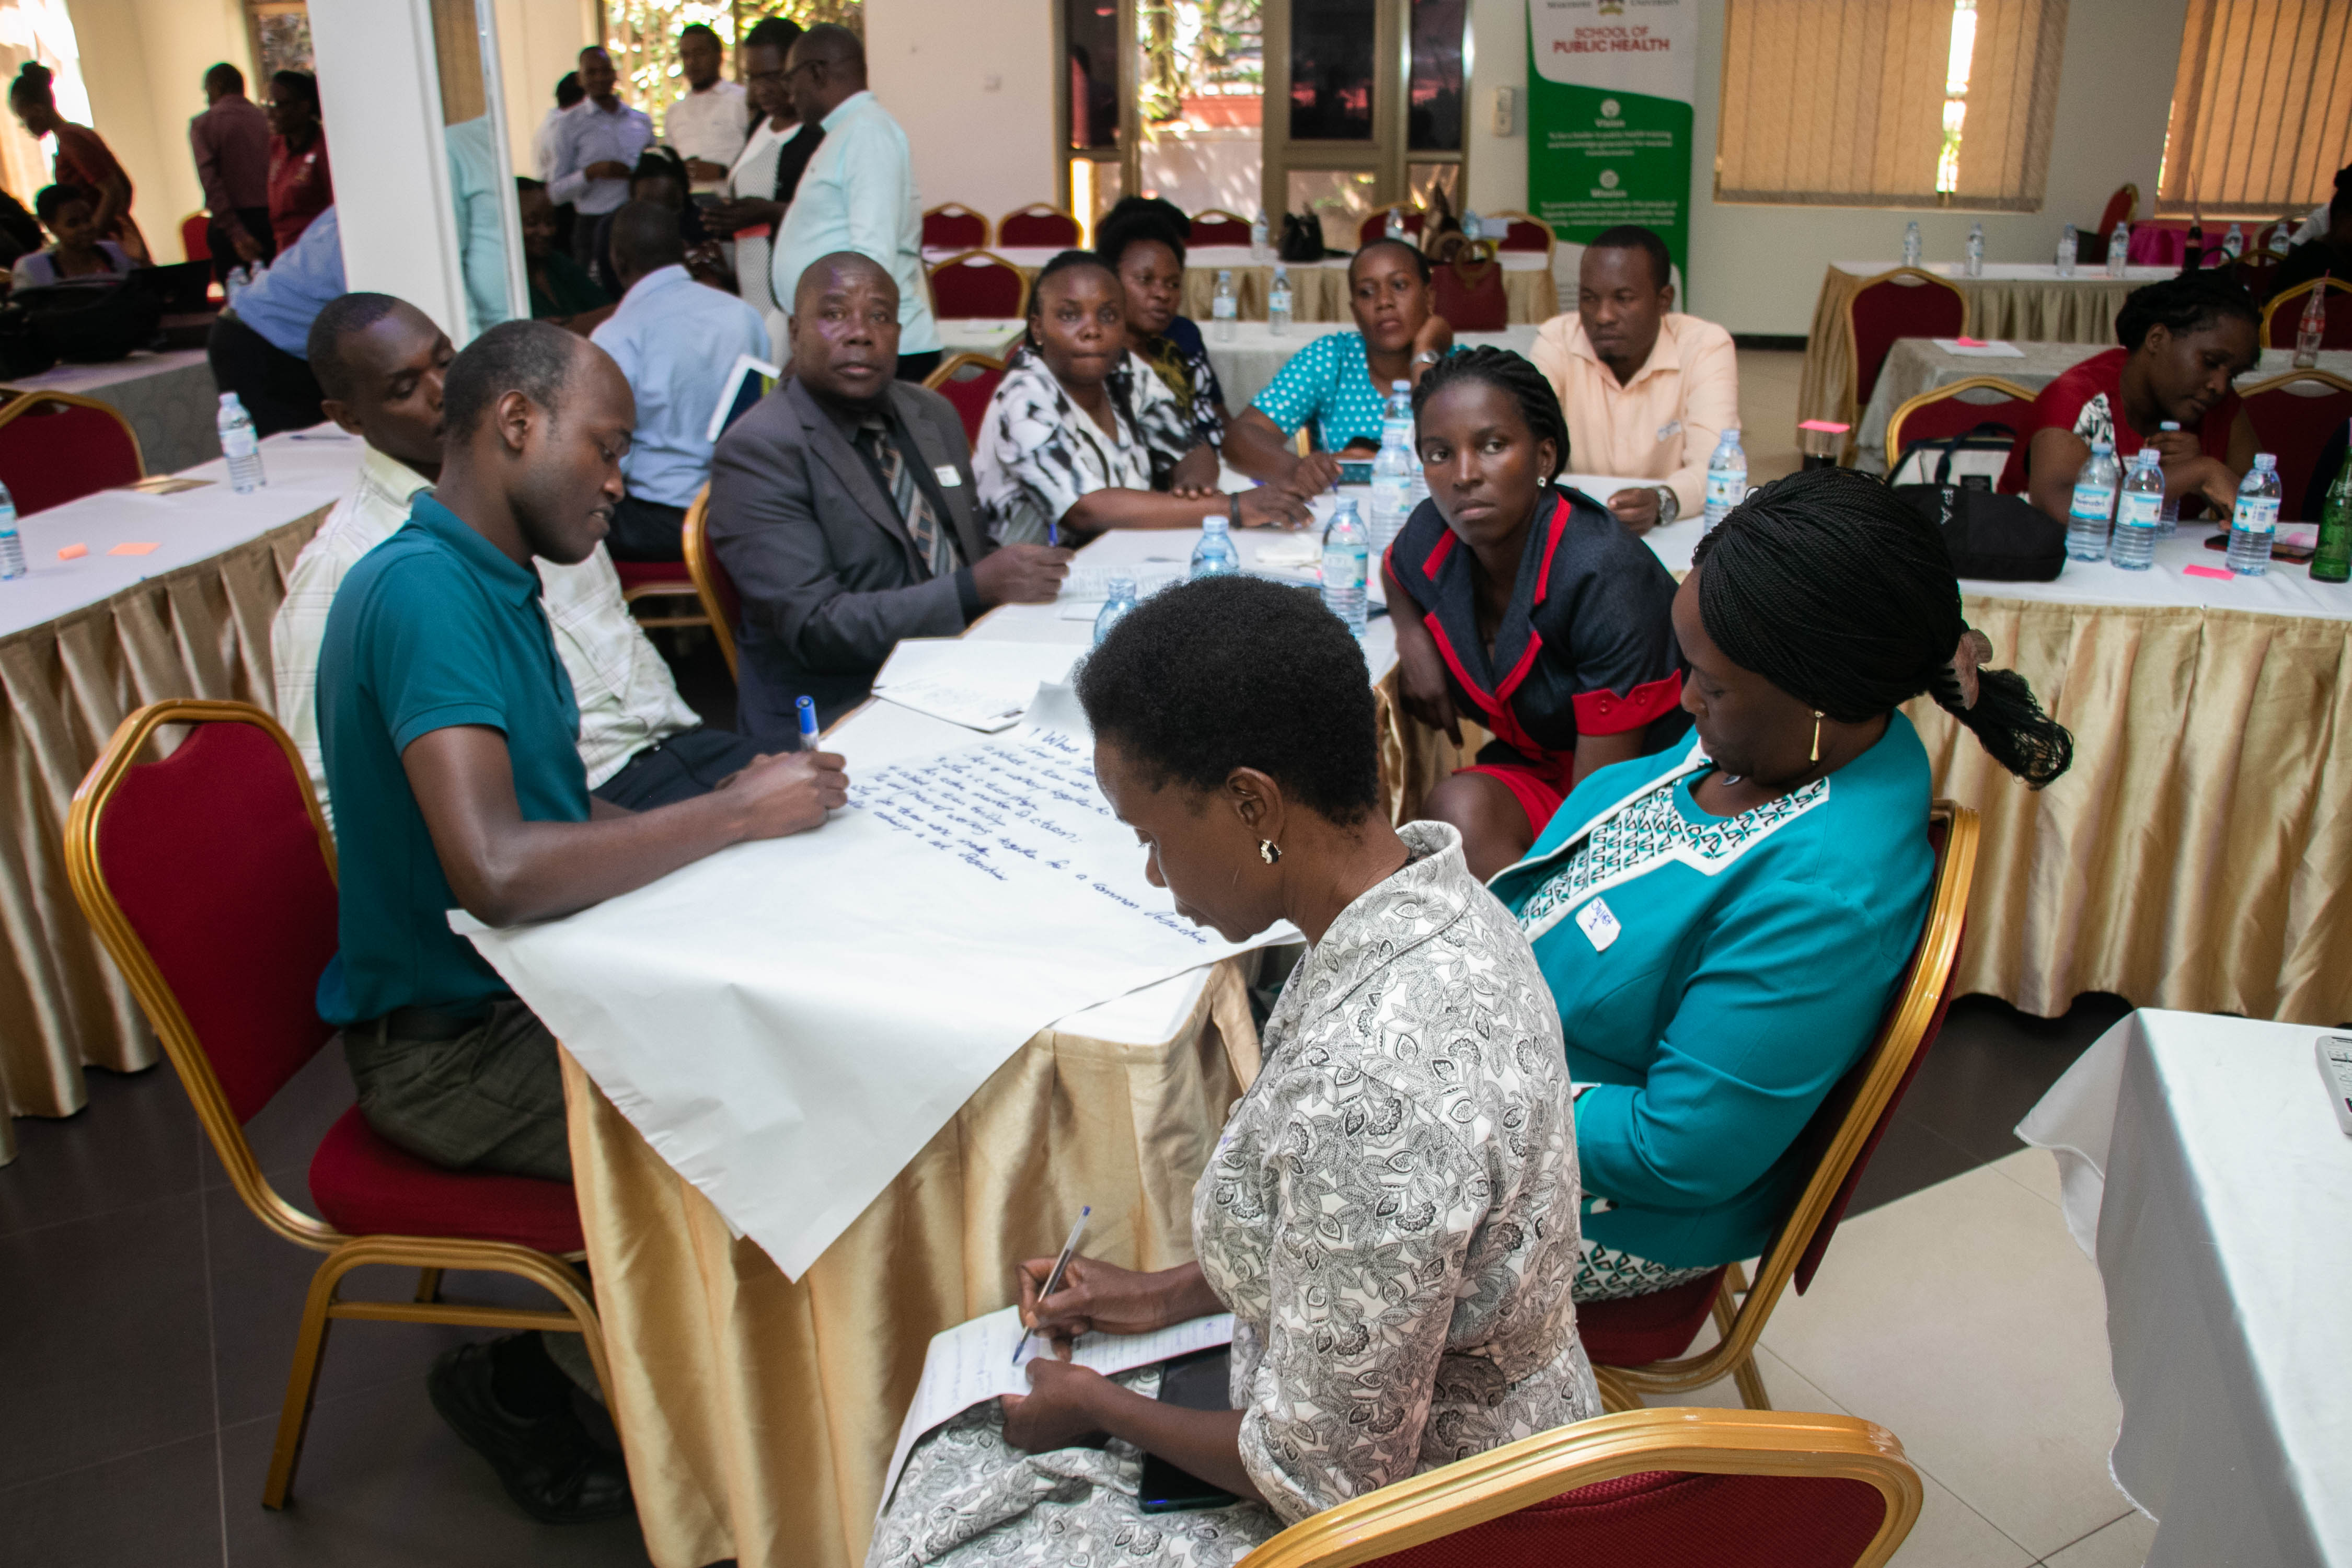 Participants engaging in a group discussion during the workshop.